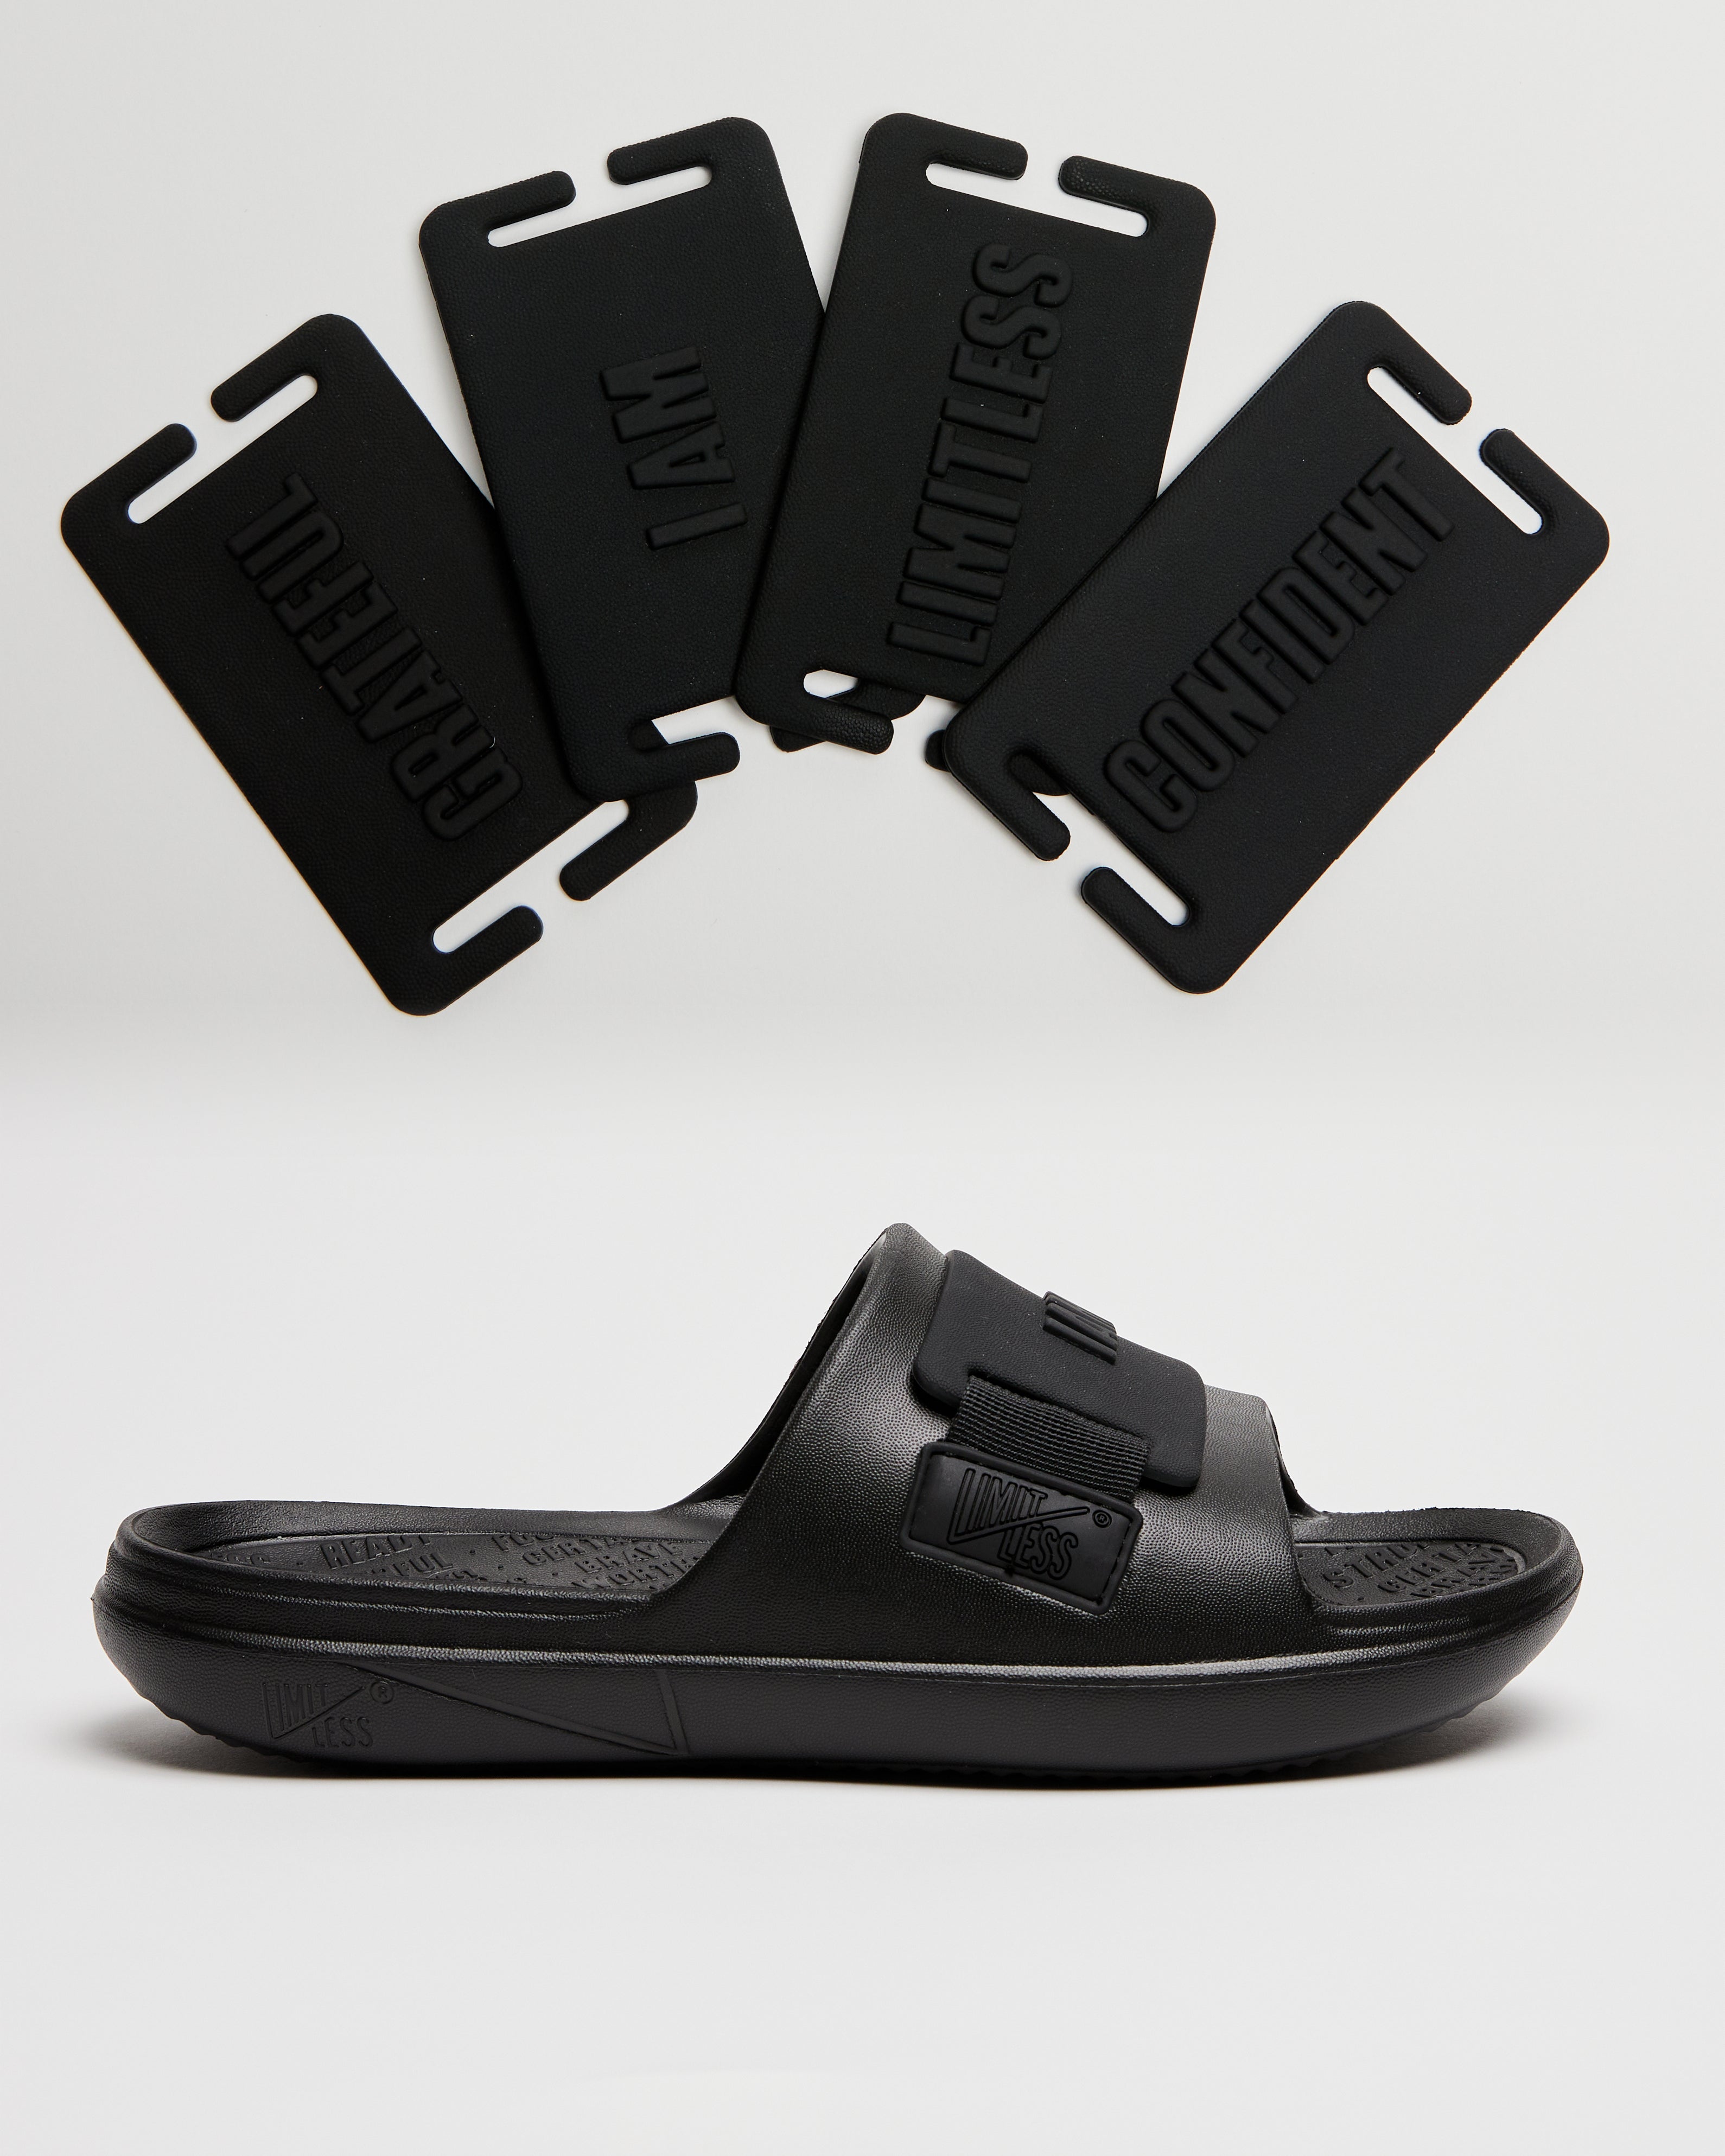 LIMITLESS SLIDES™ WITH ESSENTIAL TIBAH™ QUAD - FRANKLIN ROAD ACADEMY EDITION